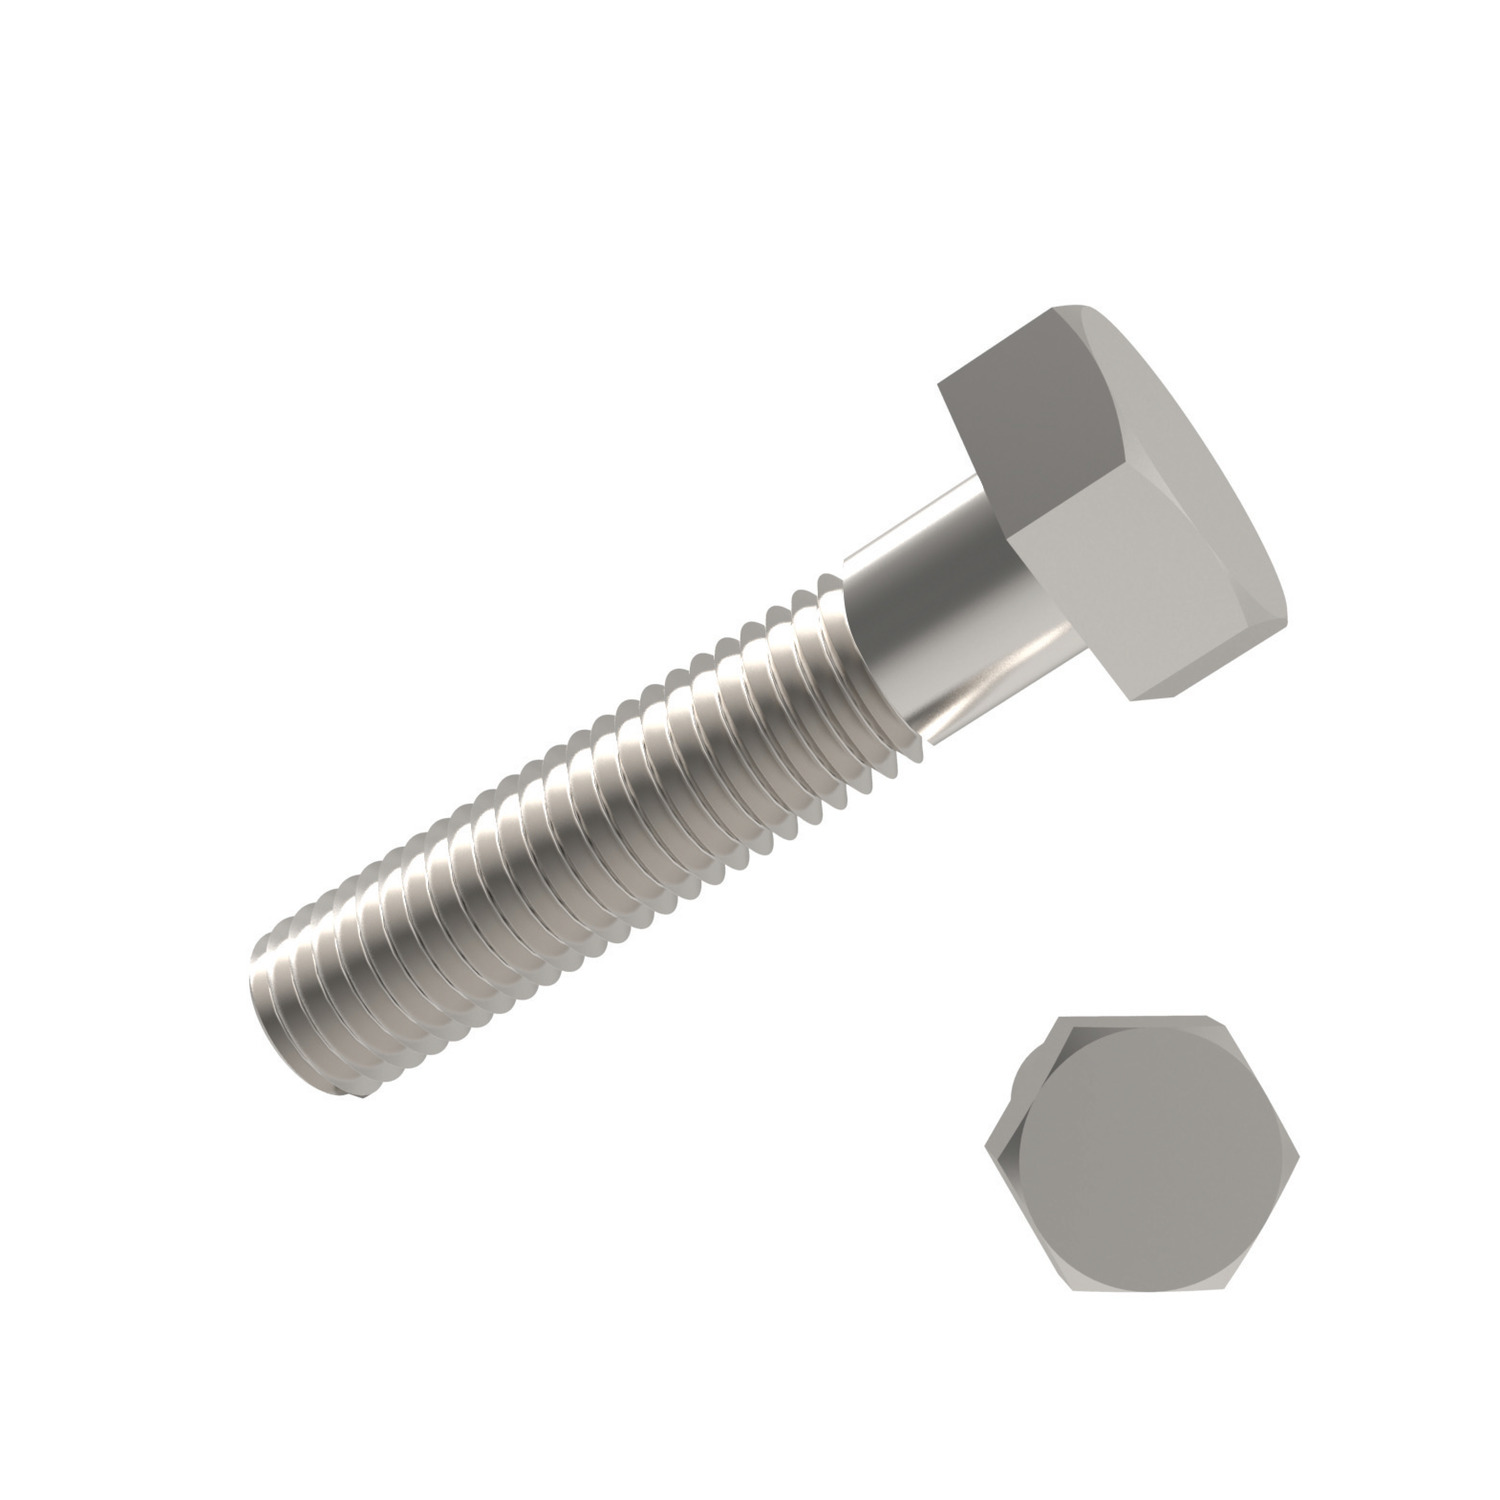 Product P0262.A2, Hexagon Head Bolts A2 stainless / 